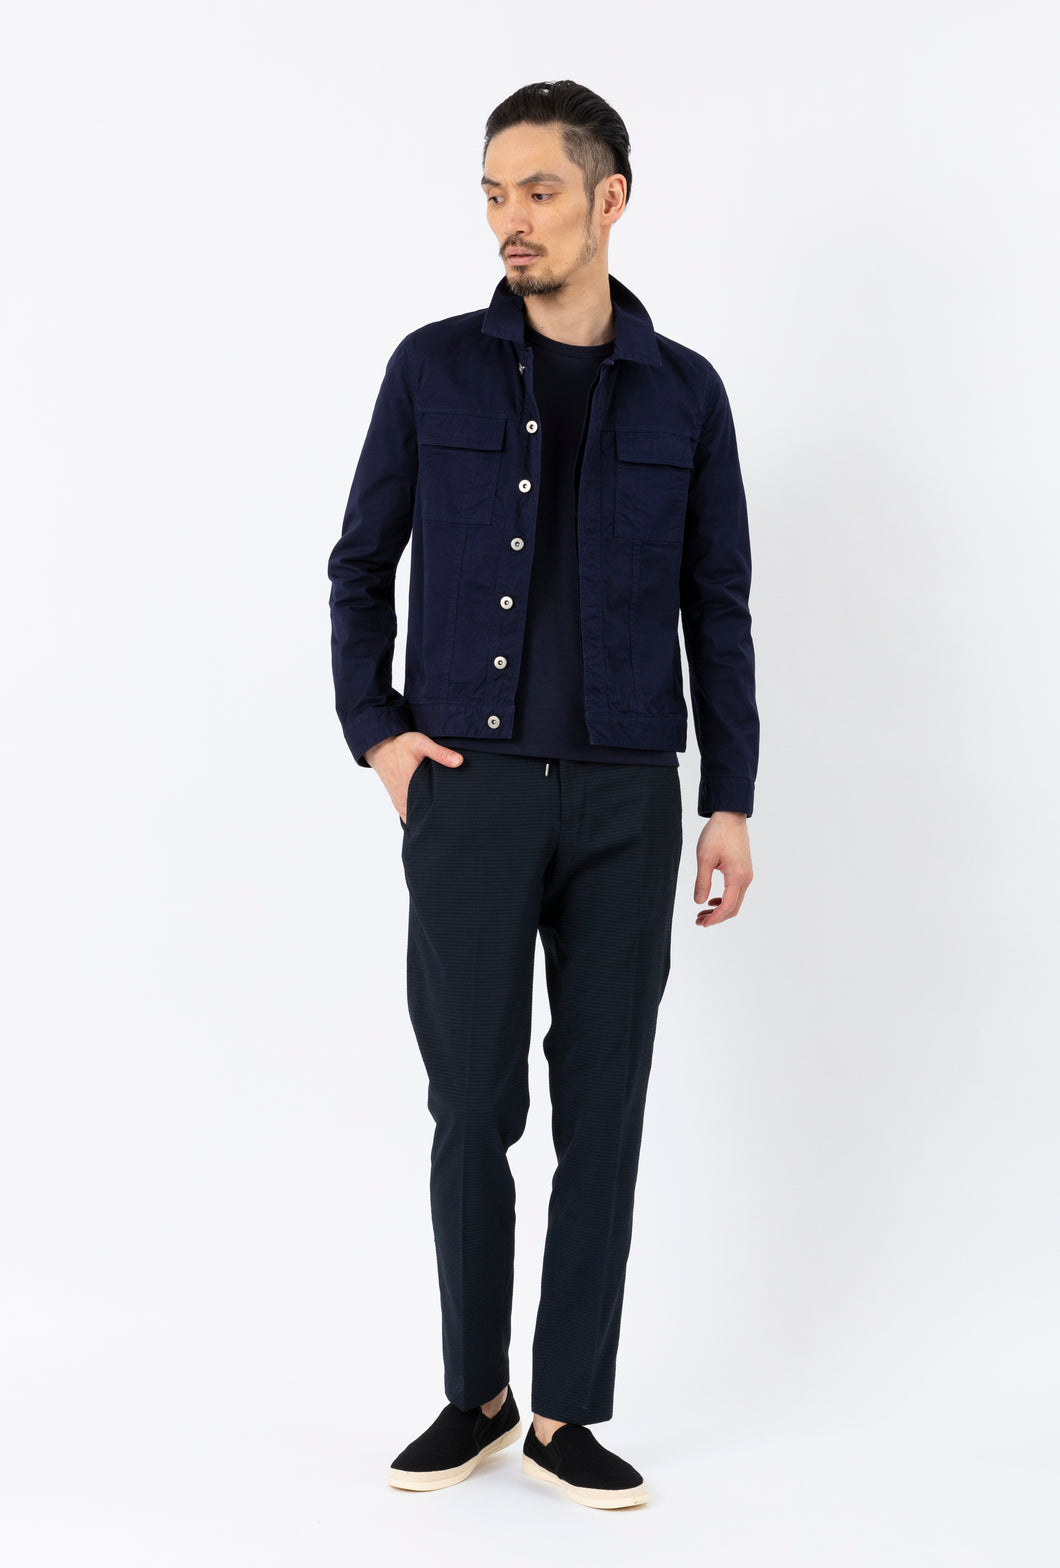 TCR2210223-39 Airy two way stretch seersucker easy slim fit